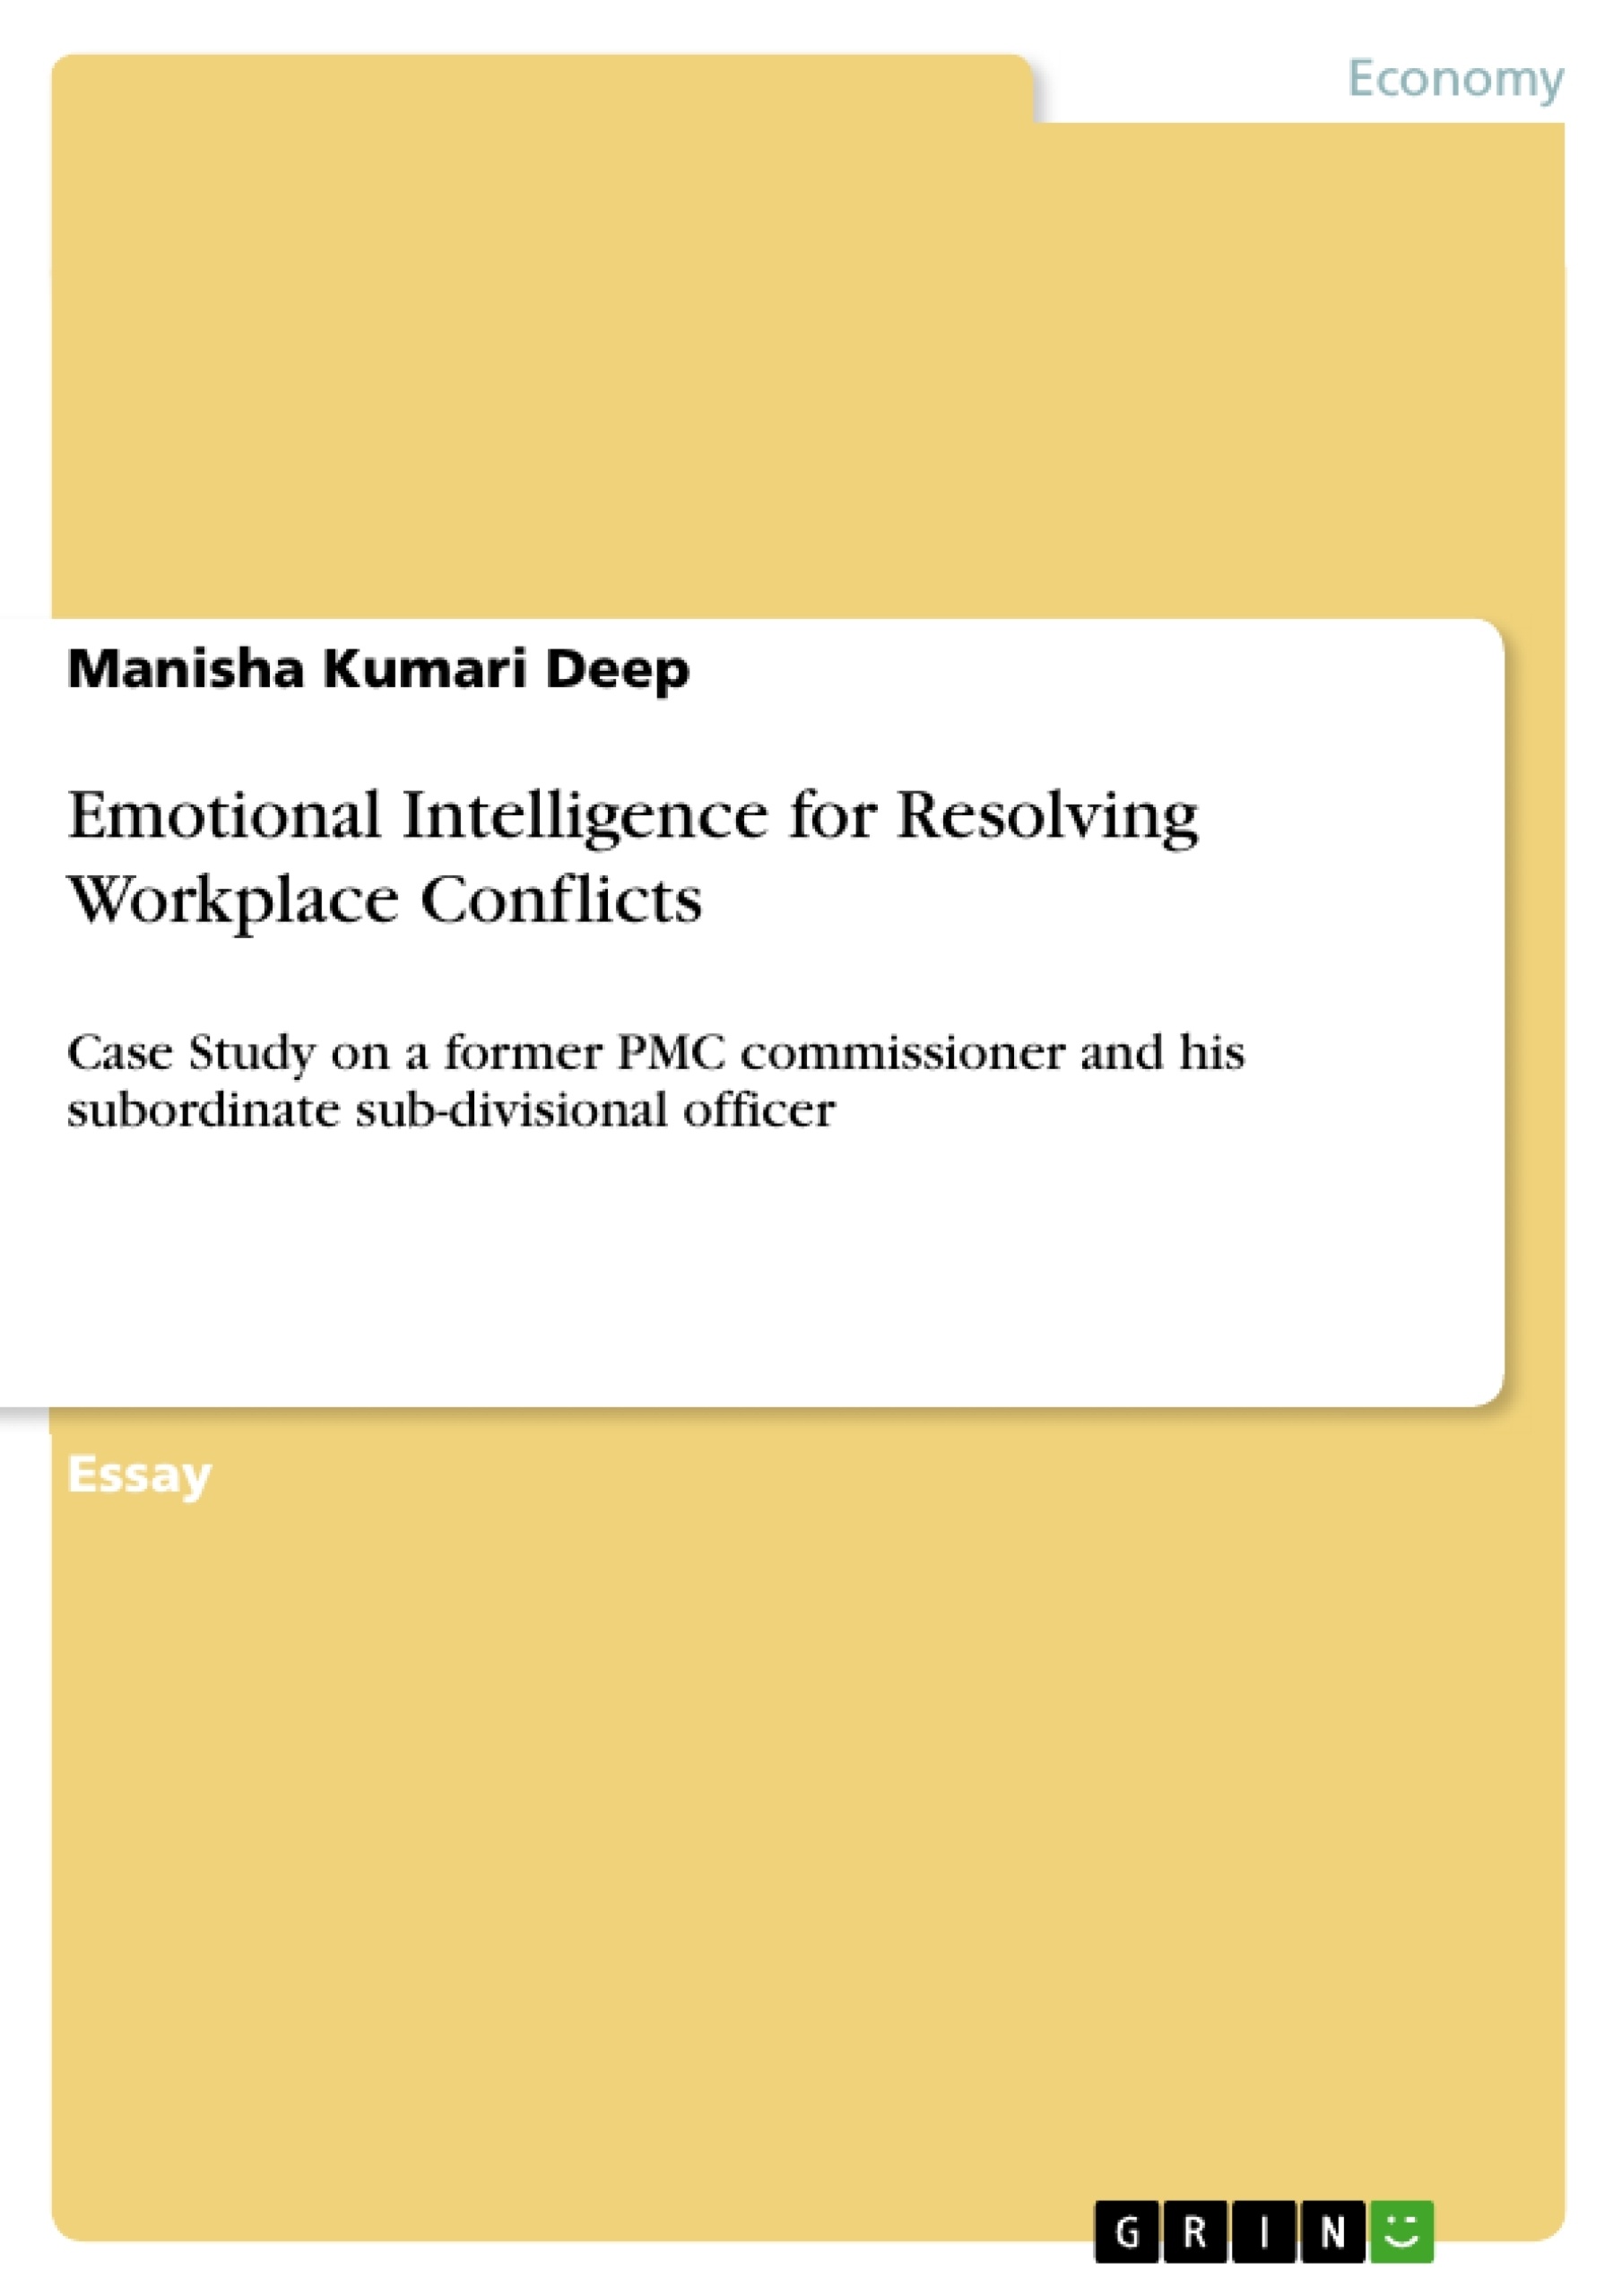 Title: Emotional Intelligence for Resolving Workplace Conflicts